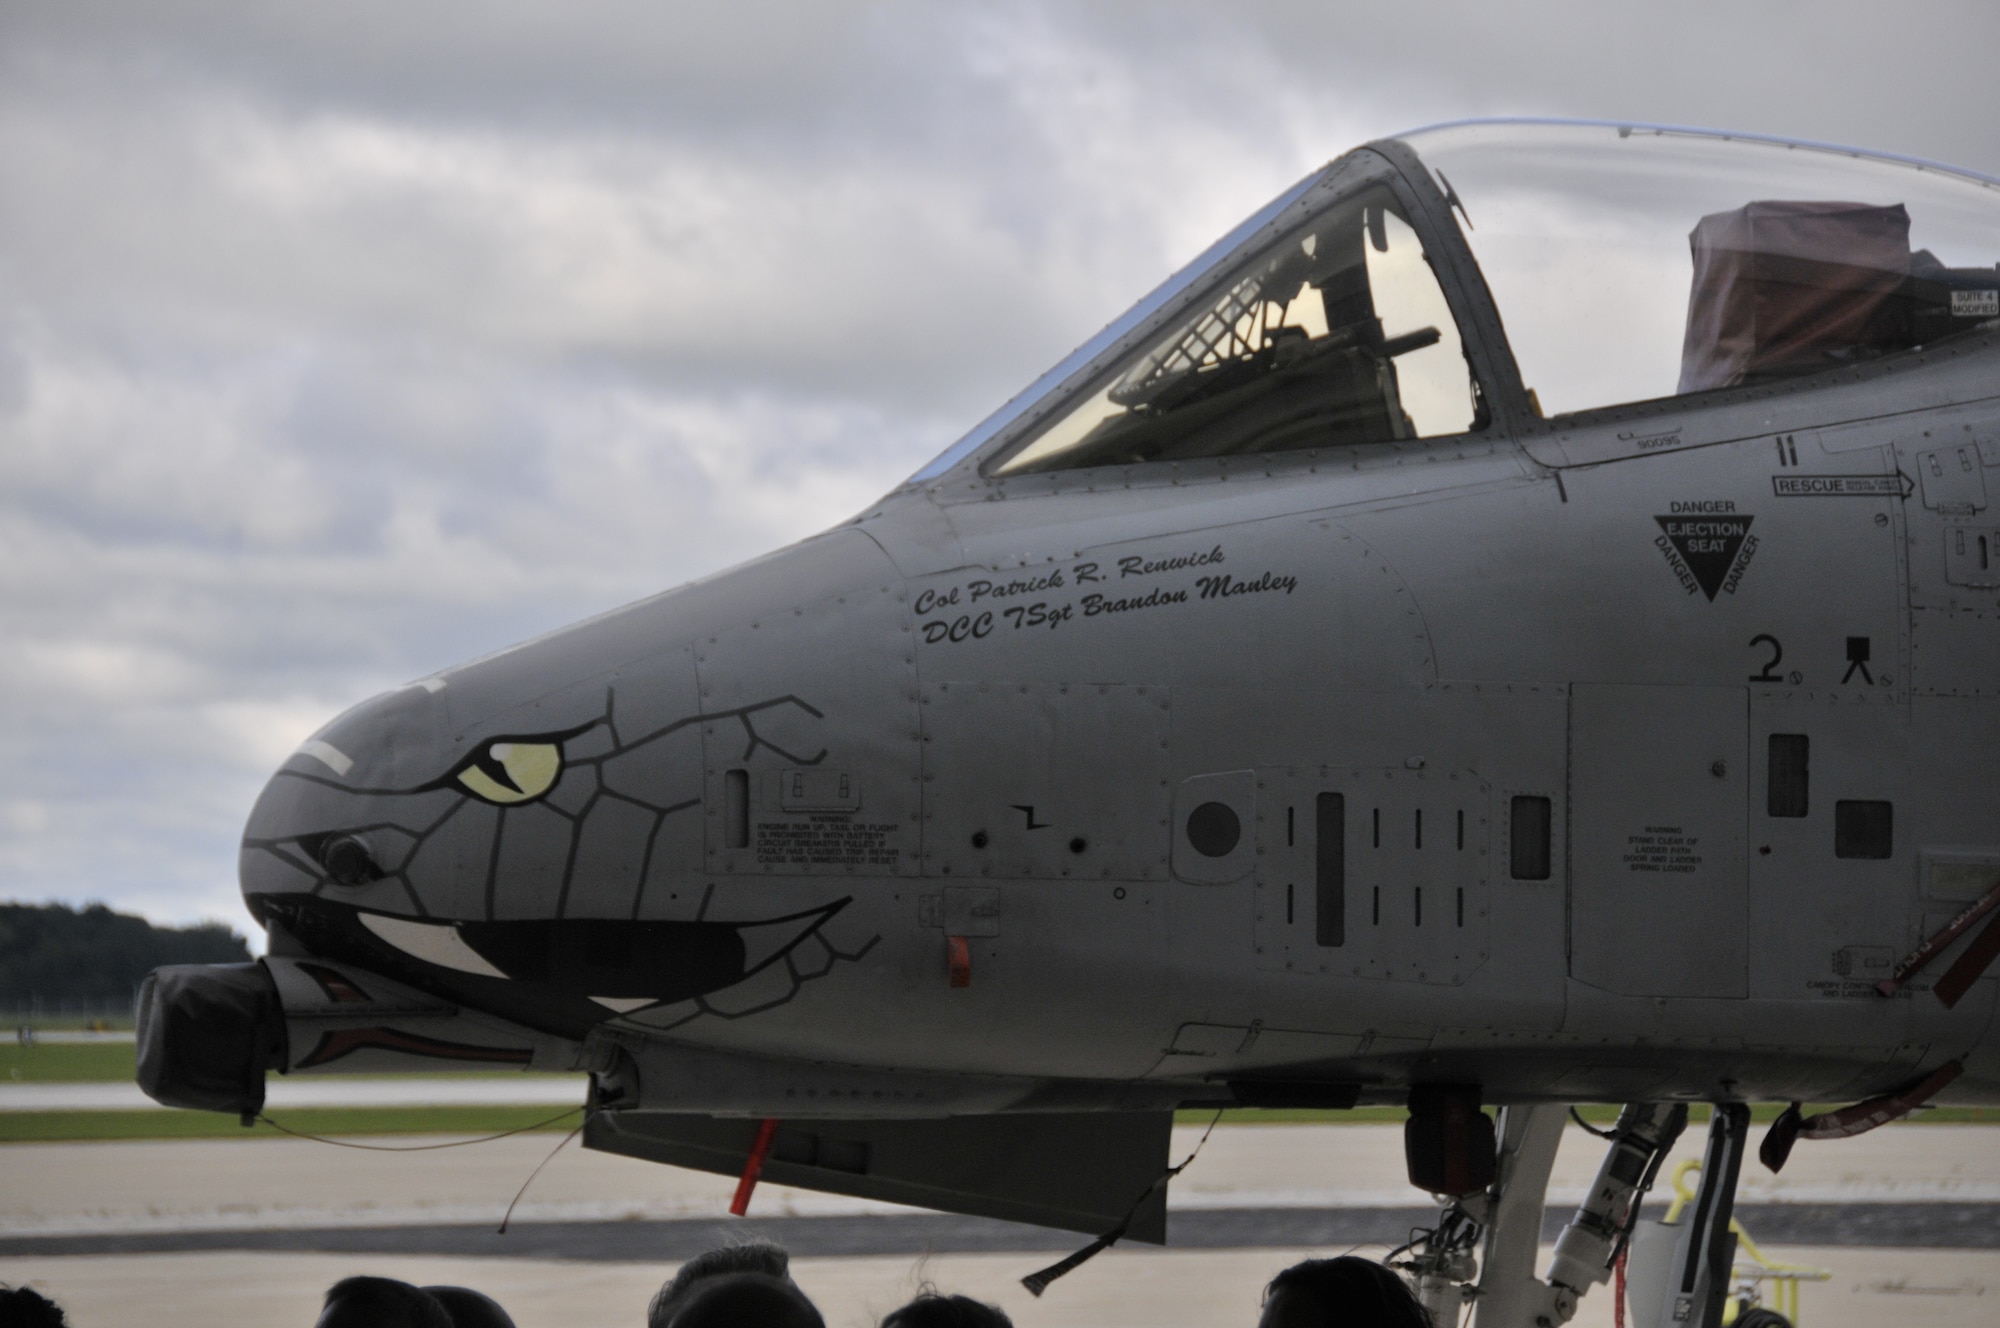 An A-10 Thunderbolt II aircraft is shown displaying the name of Col. Patrick R. Renwick, newly appointed Commander of the 122nd Fighter Wing, Fort Wayne Air National Guard Base, Fort Wayne, Indiana. Renwick succeeded Col. David L. Augustine, former Commander, following his retirement on September 13, 2014. Augustine served as Wing Commander for three years while Renwick arrives from the 181st Intelligence Wing, Terre Haute, Indiana. (Air National Guard photo by Senior Airman Joseph Boals/Released)